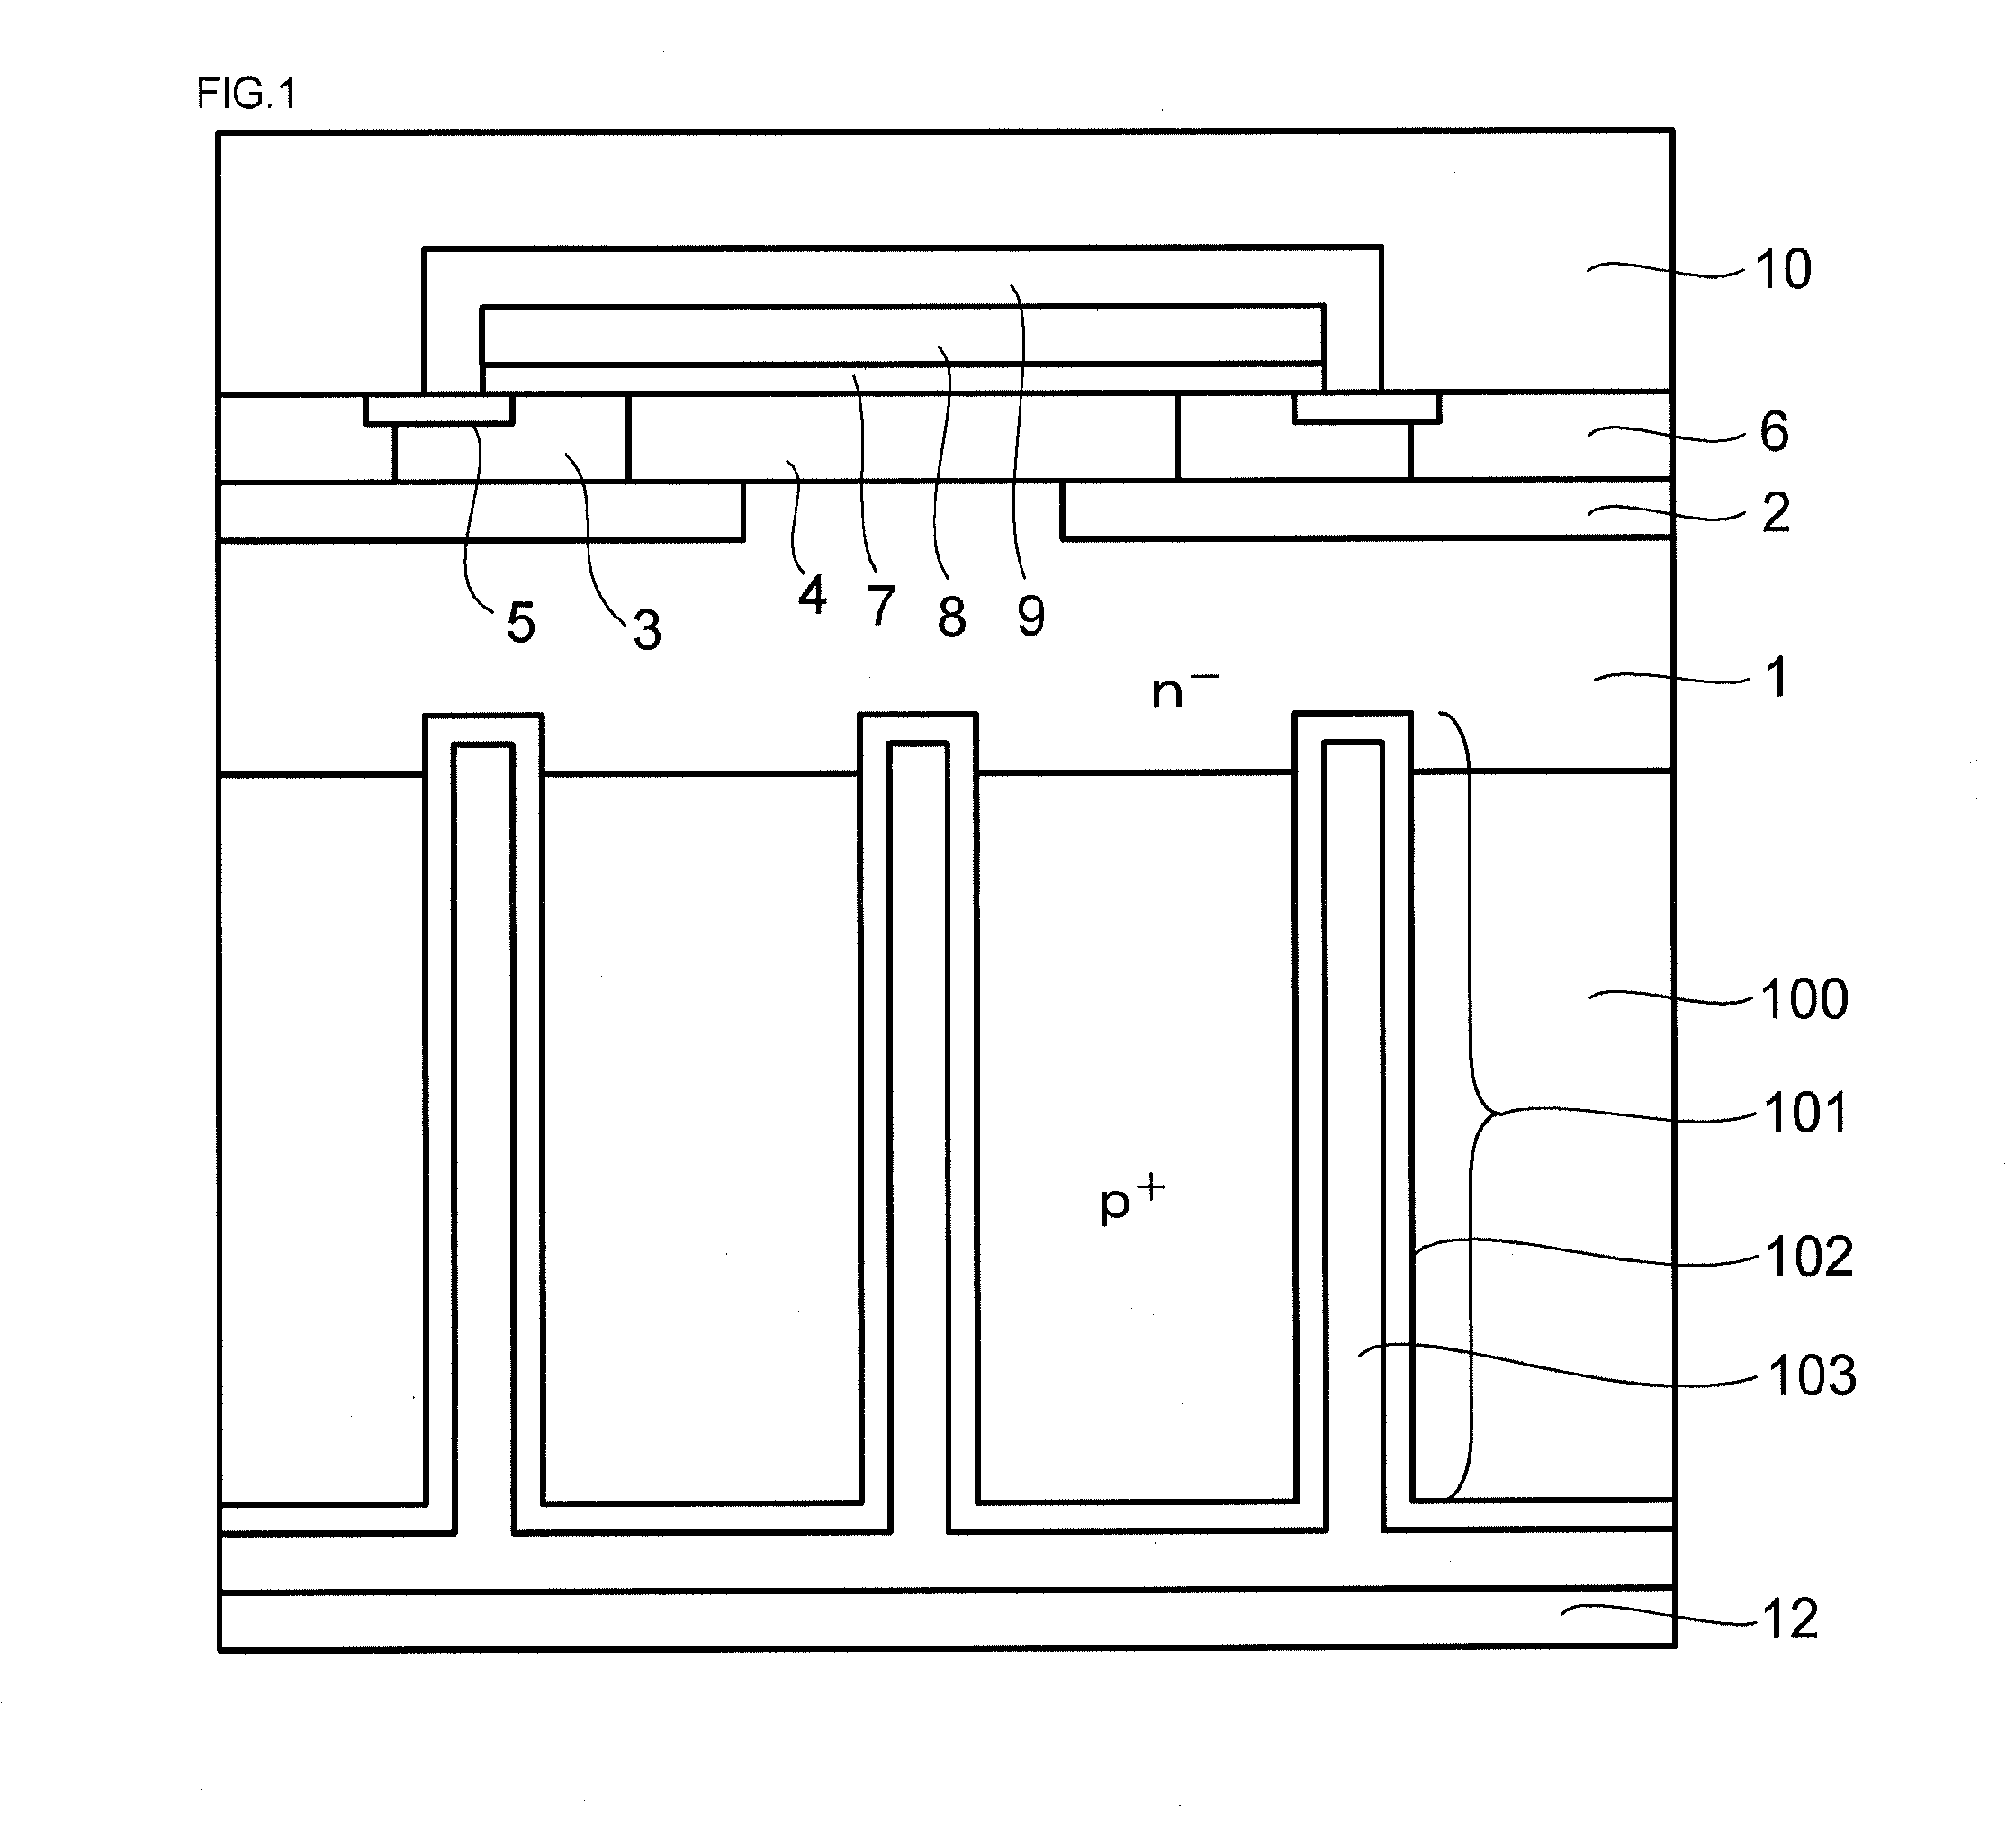 Wide-band-gap reverse-blocking MOS-type semiconductor device